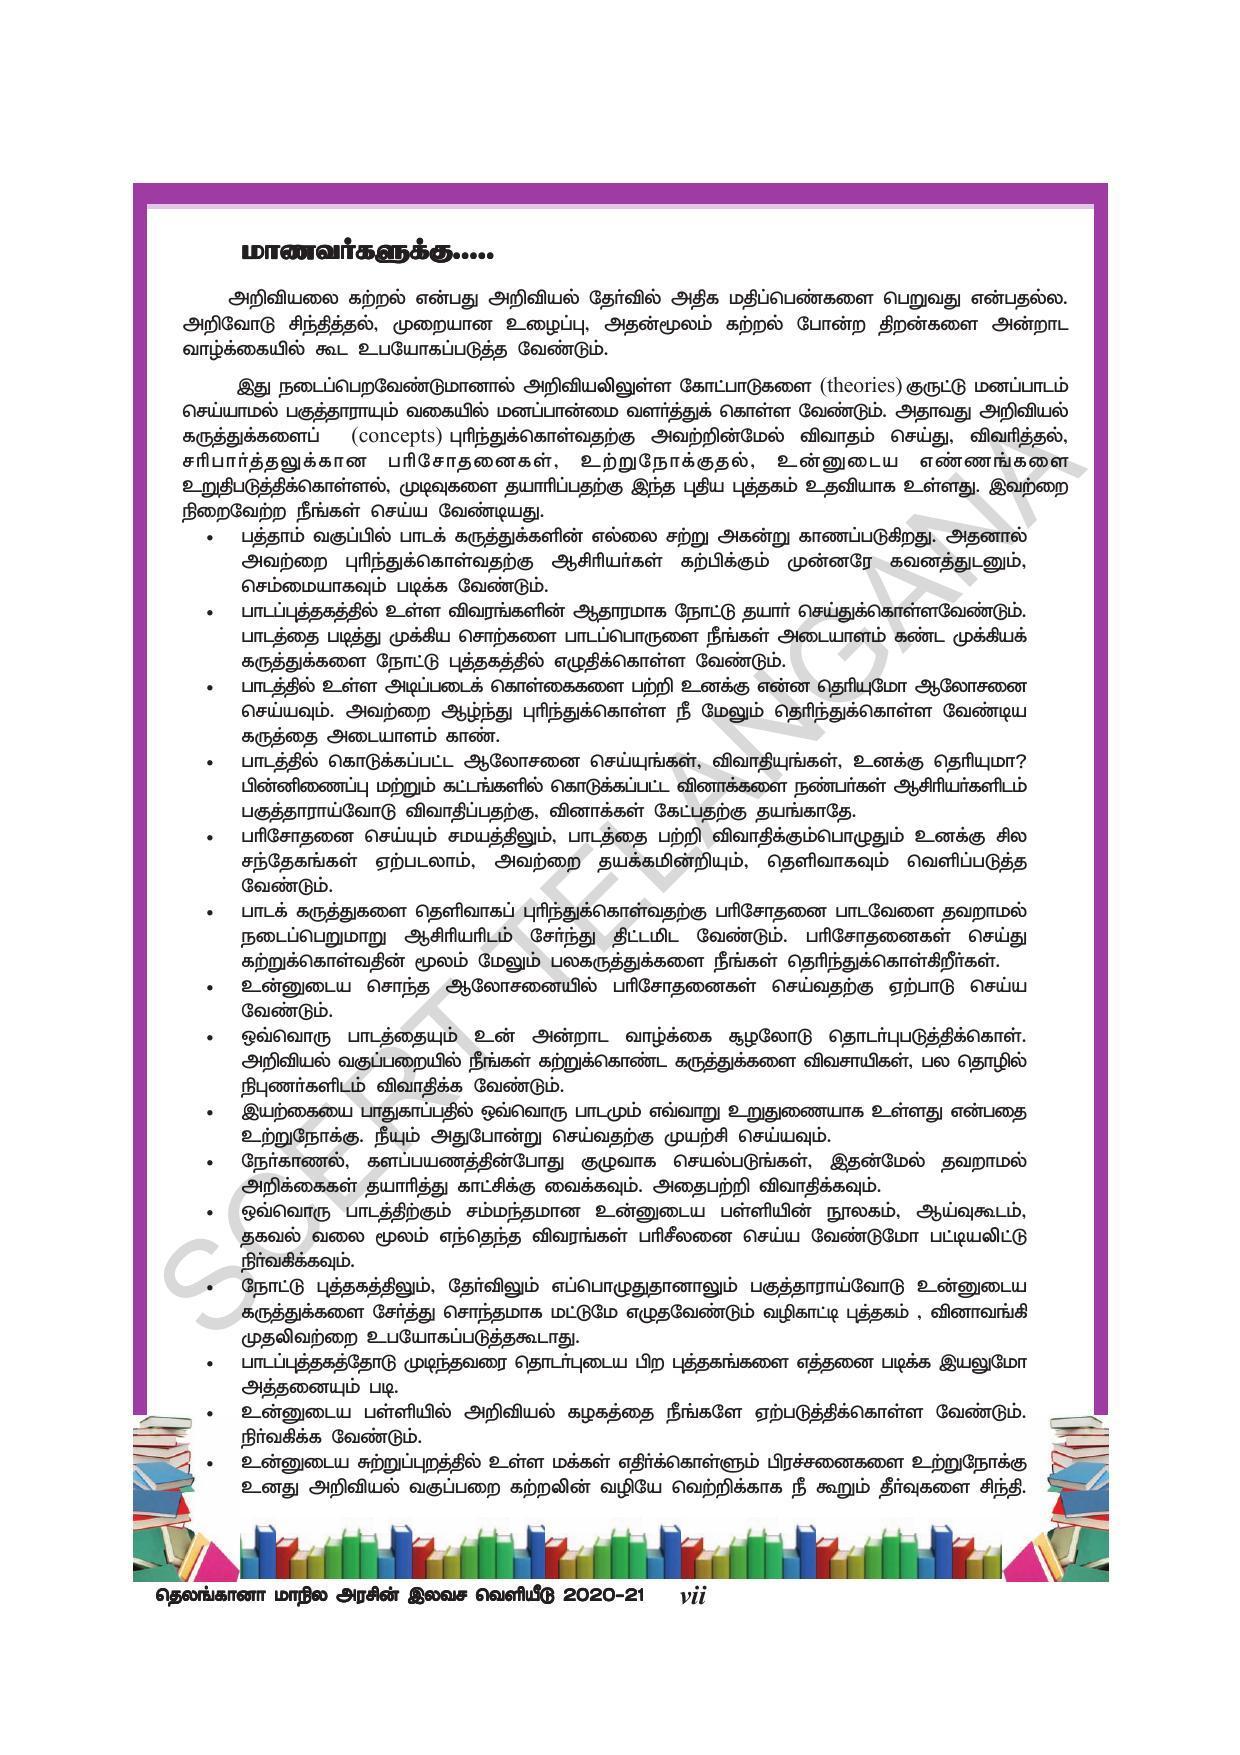 TS SCERT Class 10 Physical Science(Tamil Medium) Text Book - Page 9